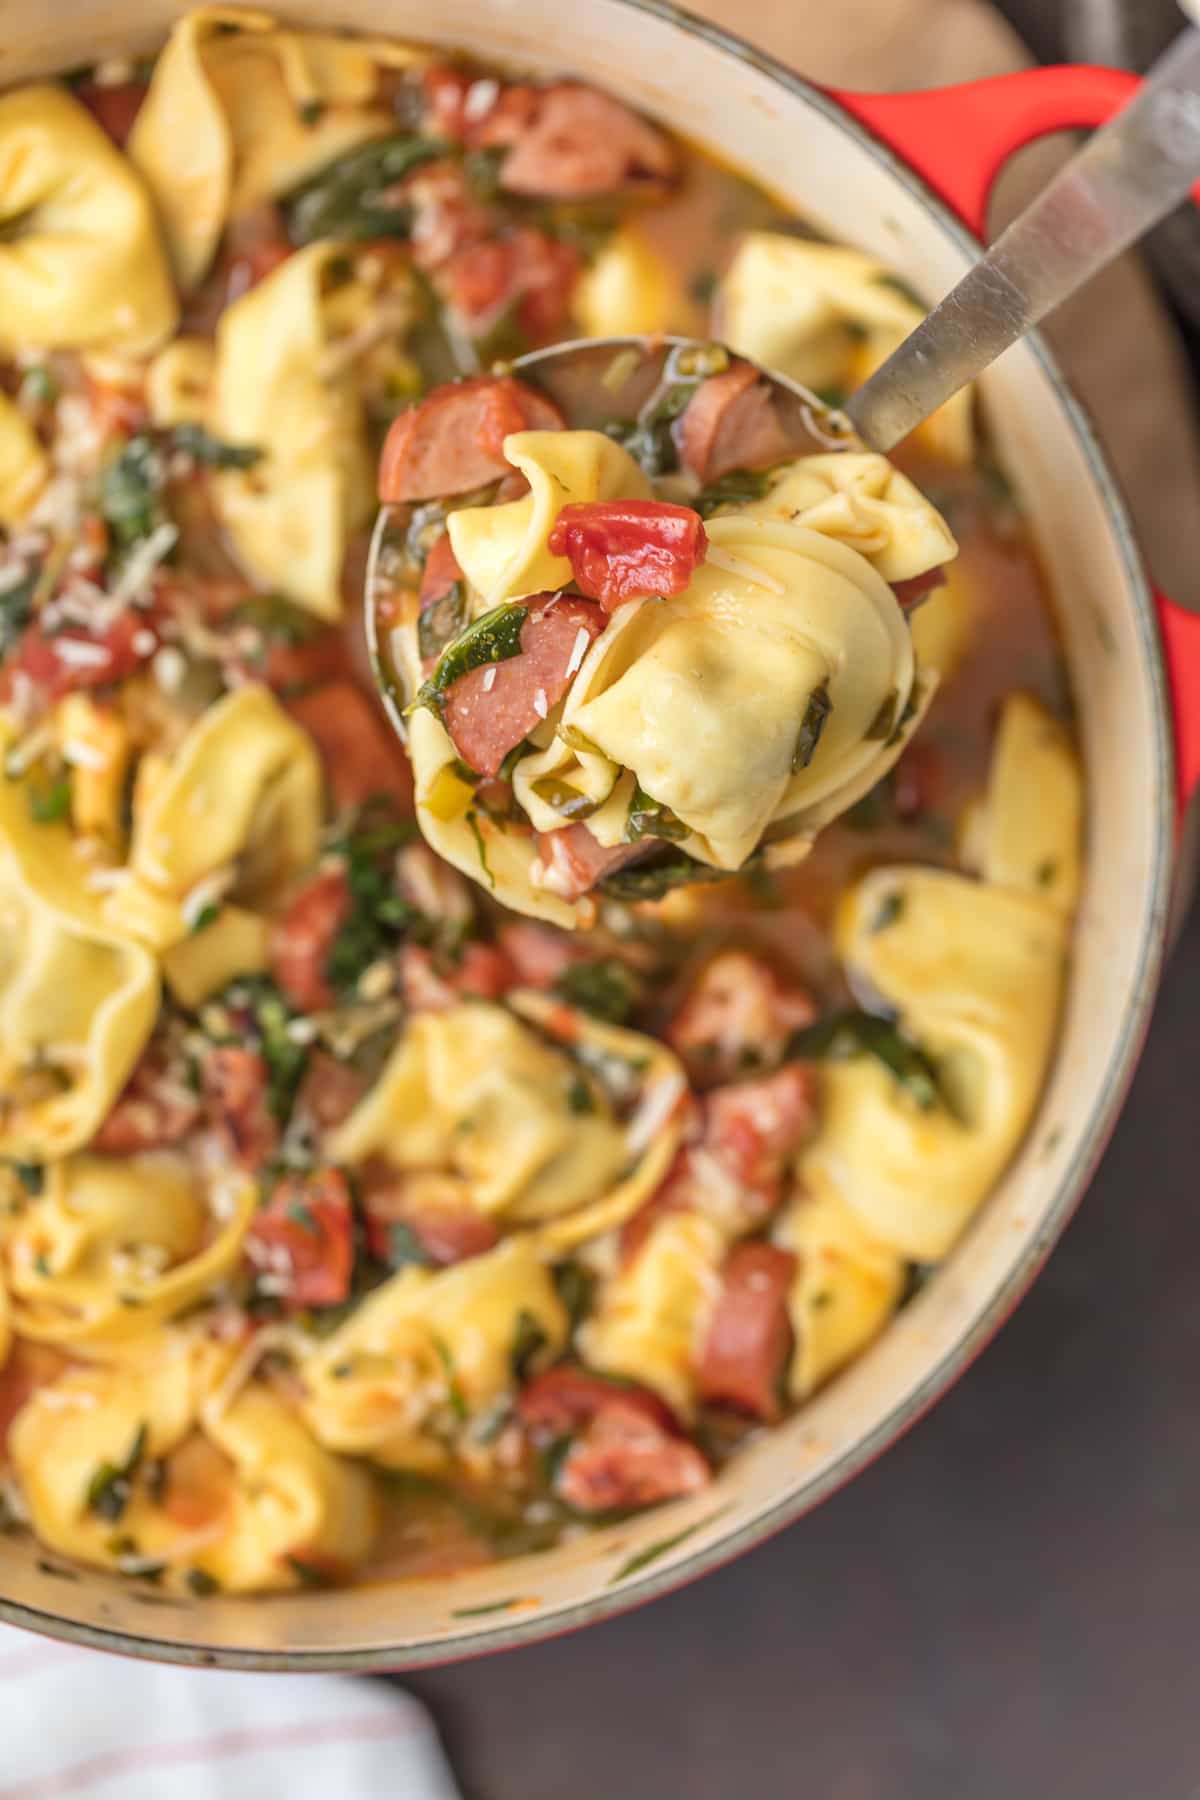 This SWEET ITALIAN SAUSAGE TORTELLINI SOUP is such an easy and delicious soup to throw together on busy days. Loaded with flavor while being kind to your waistline. I love it!